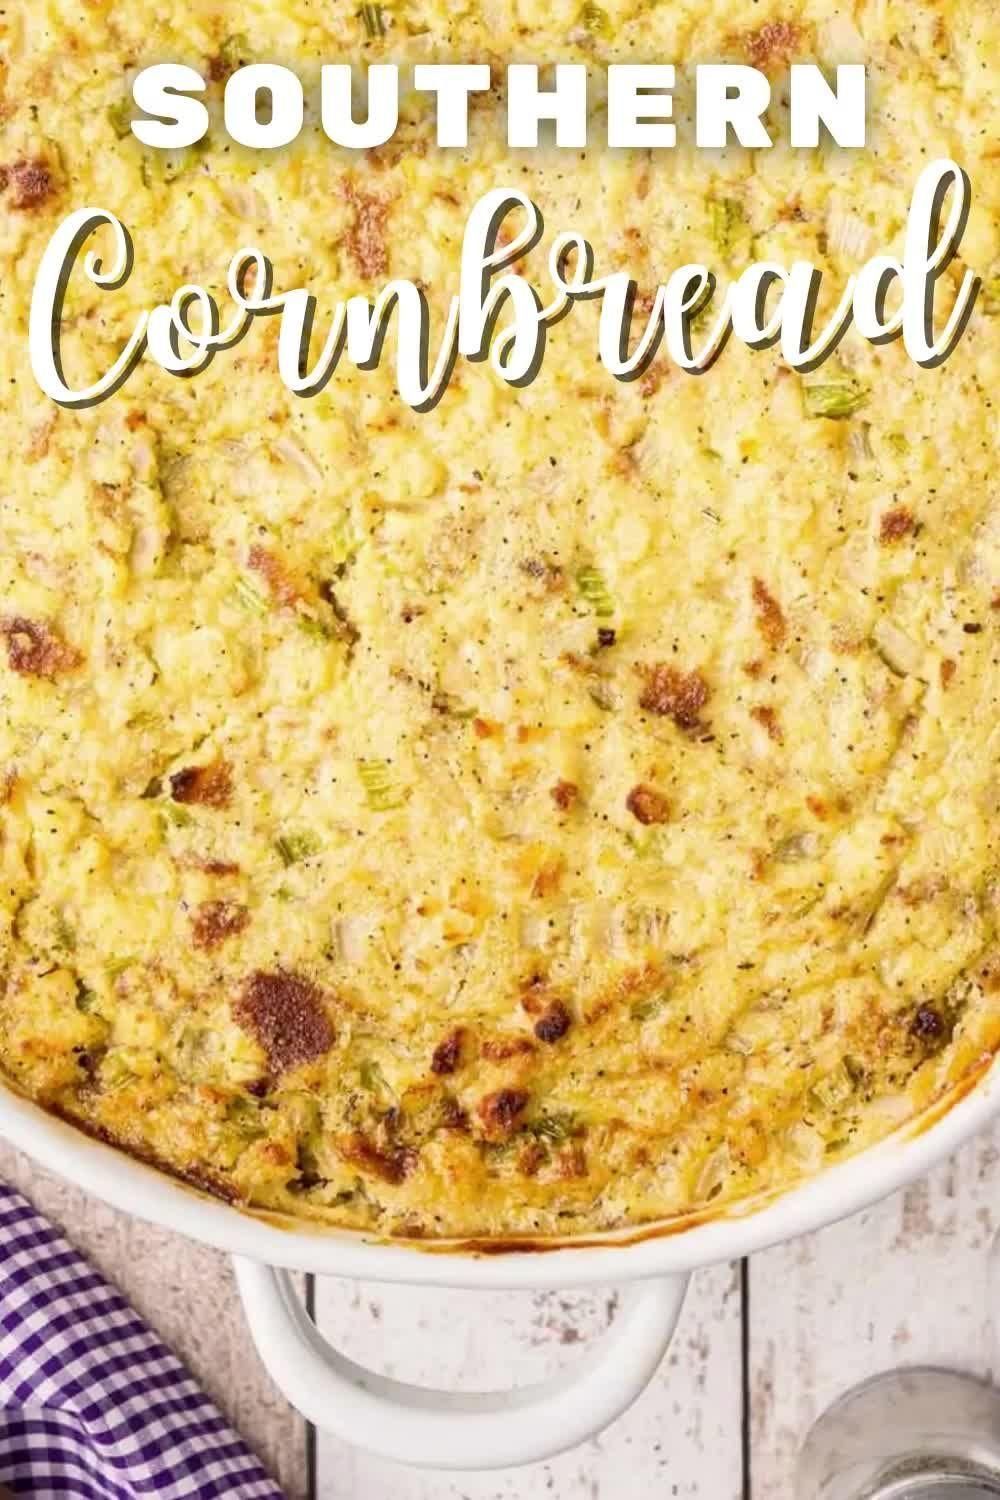 Turkey and Southern Cornbread Dressing Recipe Thanksgiving Side Dish Southern Christmas -   25 dressing recipes cornbread southern videos ideas